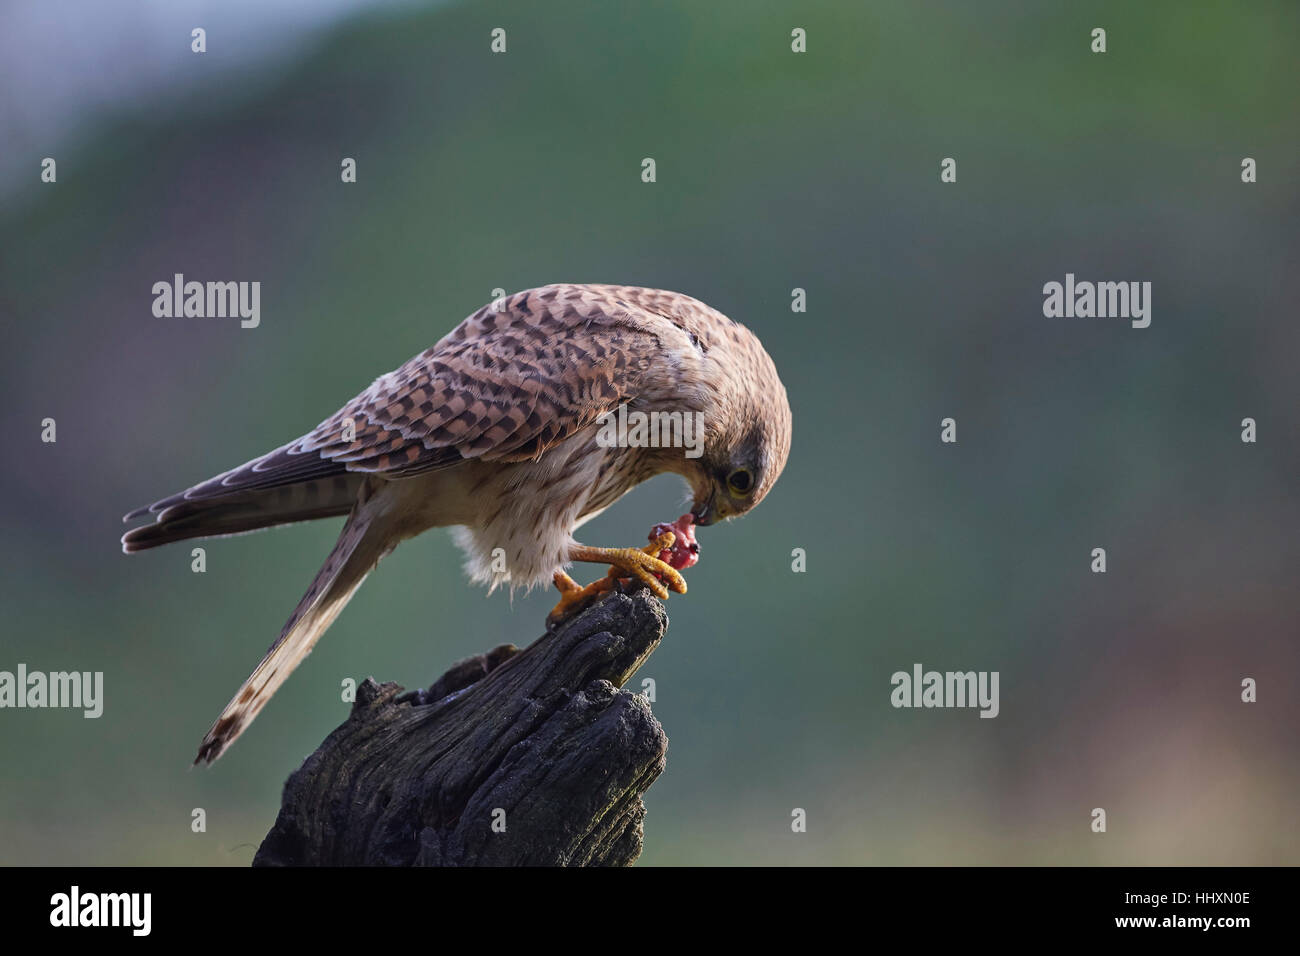 Kestrel, Falco tinnunculus perched on an old tree stump eating prey Stock Photo